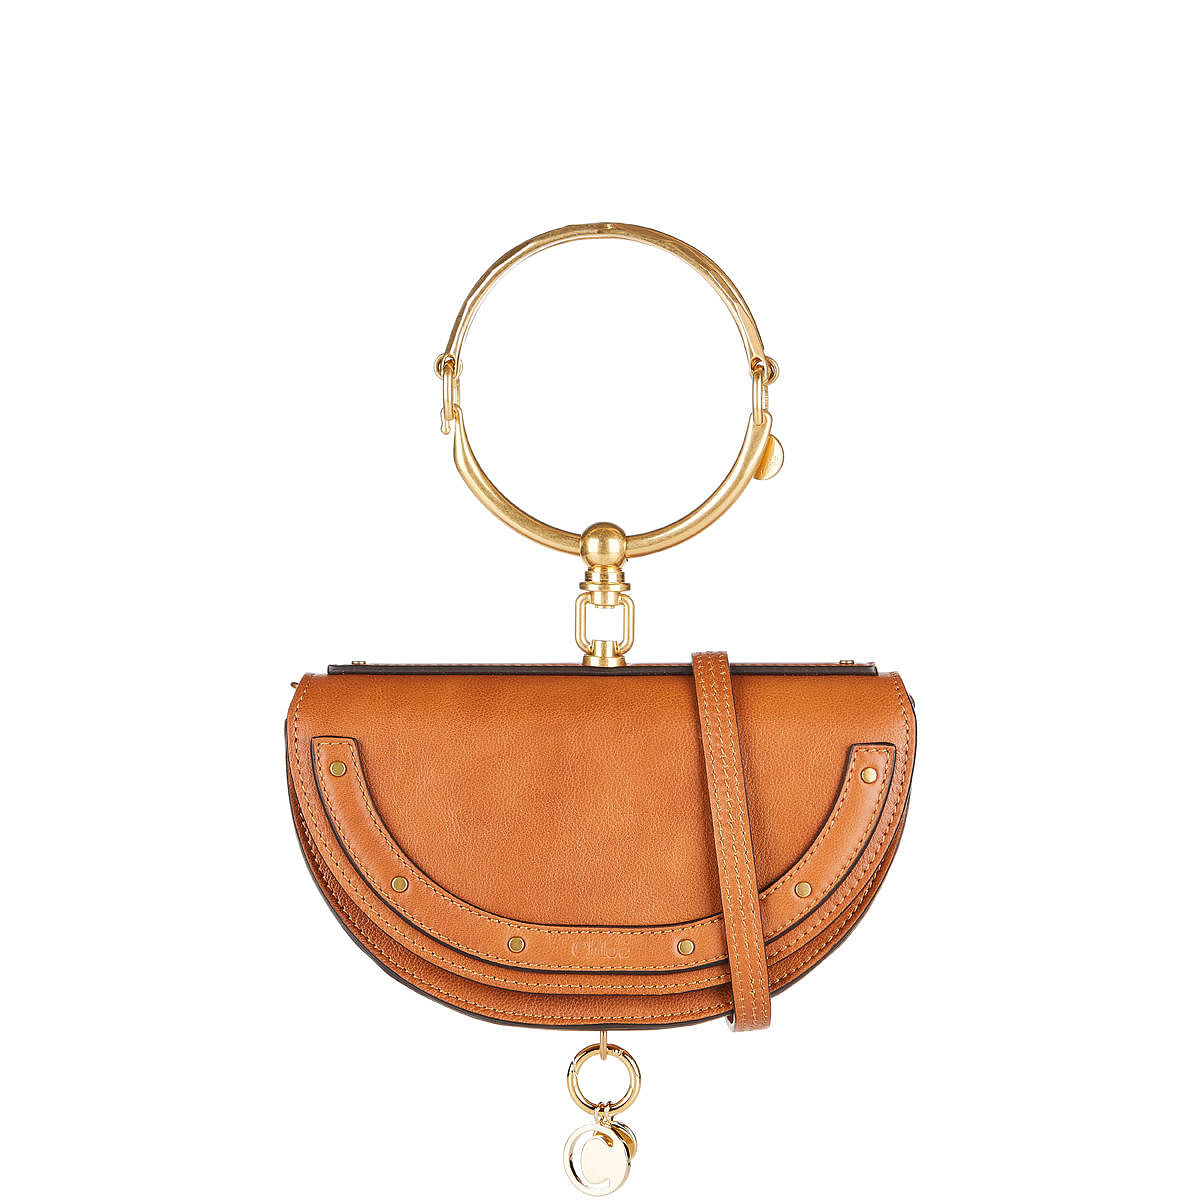 Mini & micro bags, also called ‘minaudière’— designed to carry just the bare essentials is in.